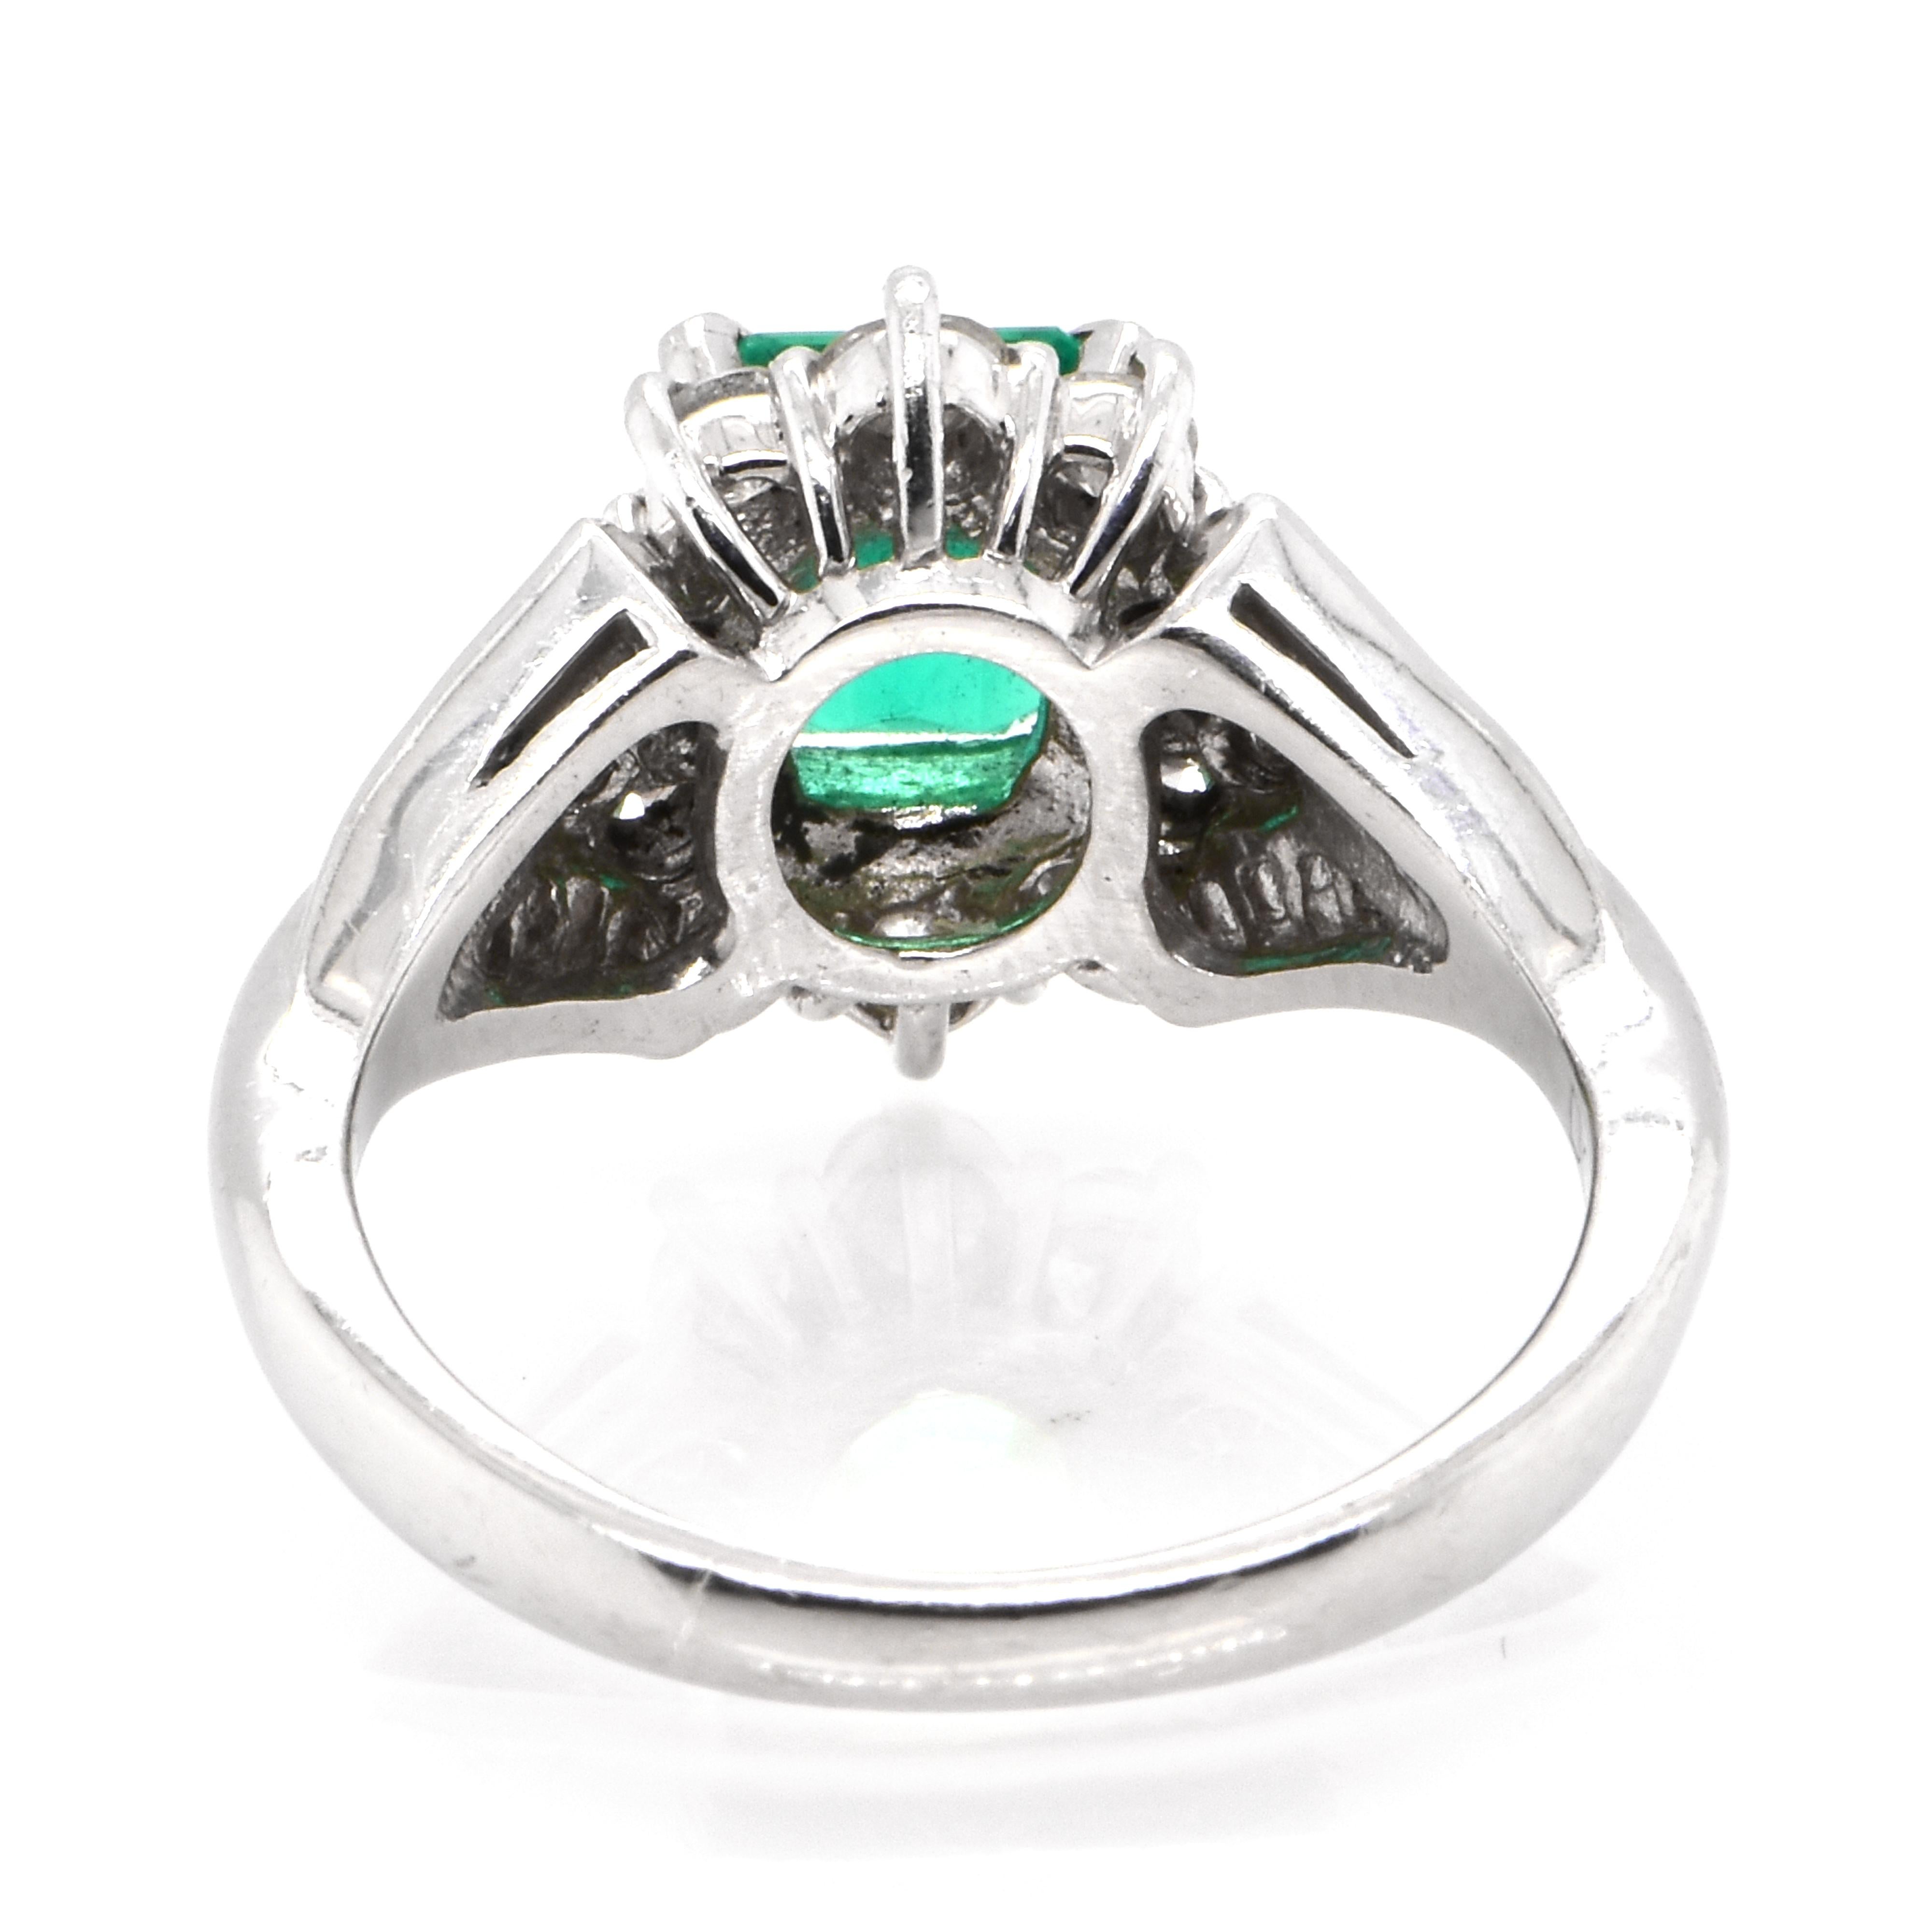 Women's 1.27 Carat Natural Colombian Emerald and Diamond Ring Made in Platinum For Sale